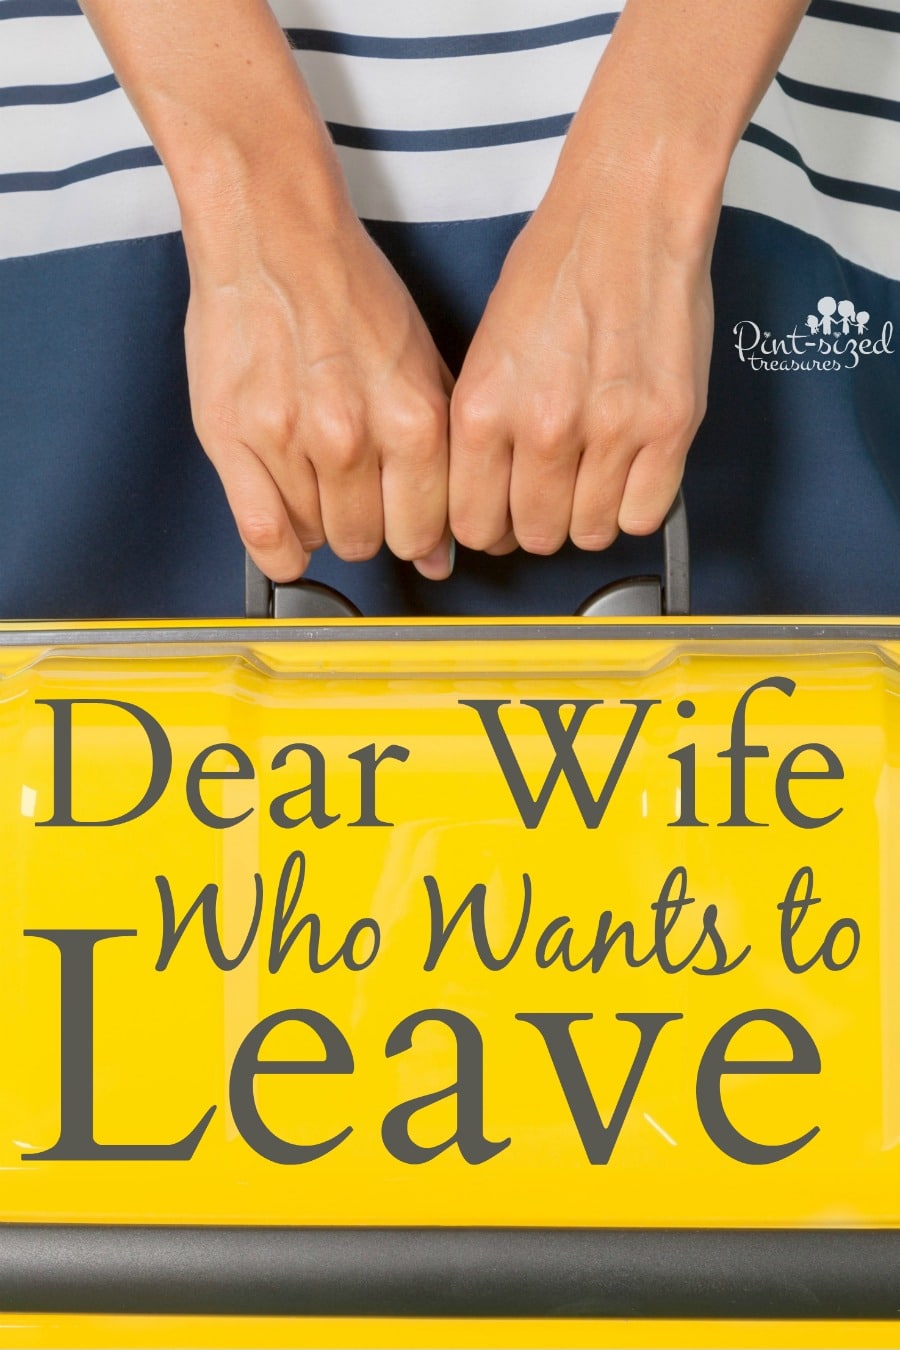 Dear Wife Who Wants to Leave --- thinks about this before you take those first steps out the door! Is your marriage and family worth saving?